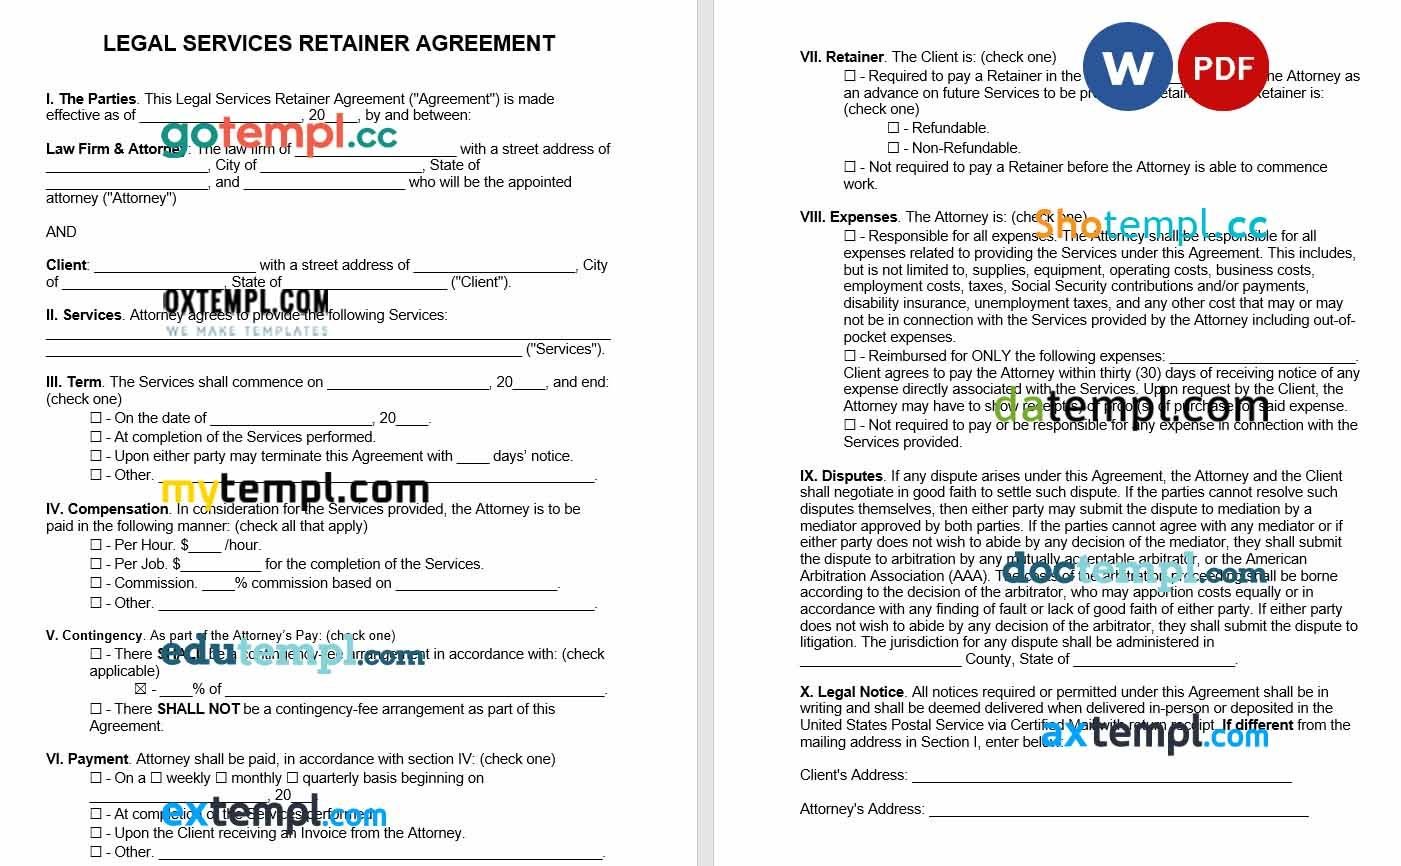 Legal Services Retainer Agreement Word example, fully editable